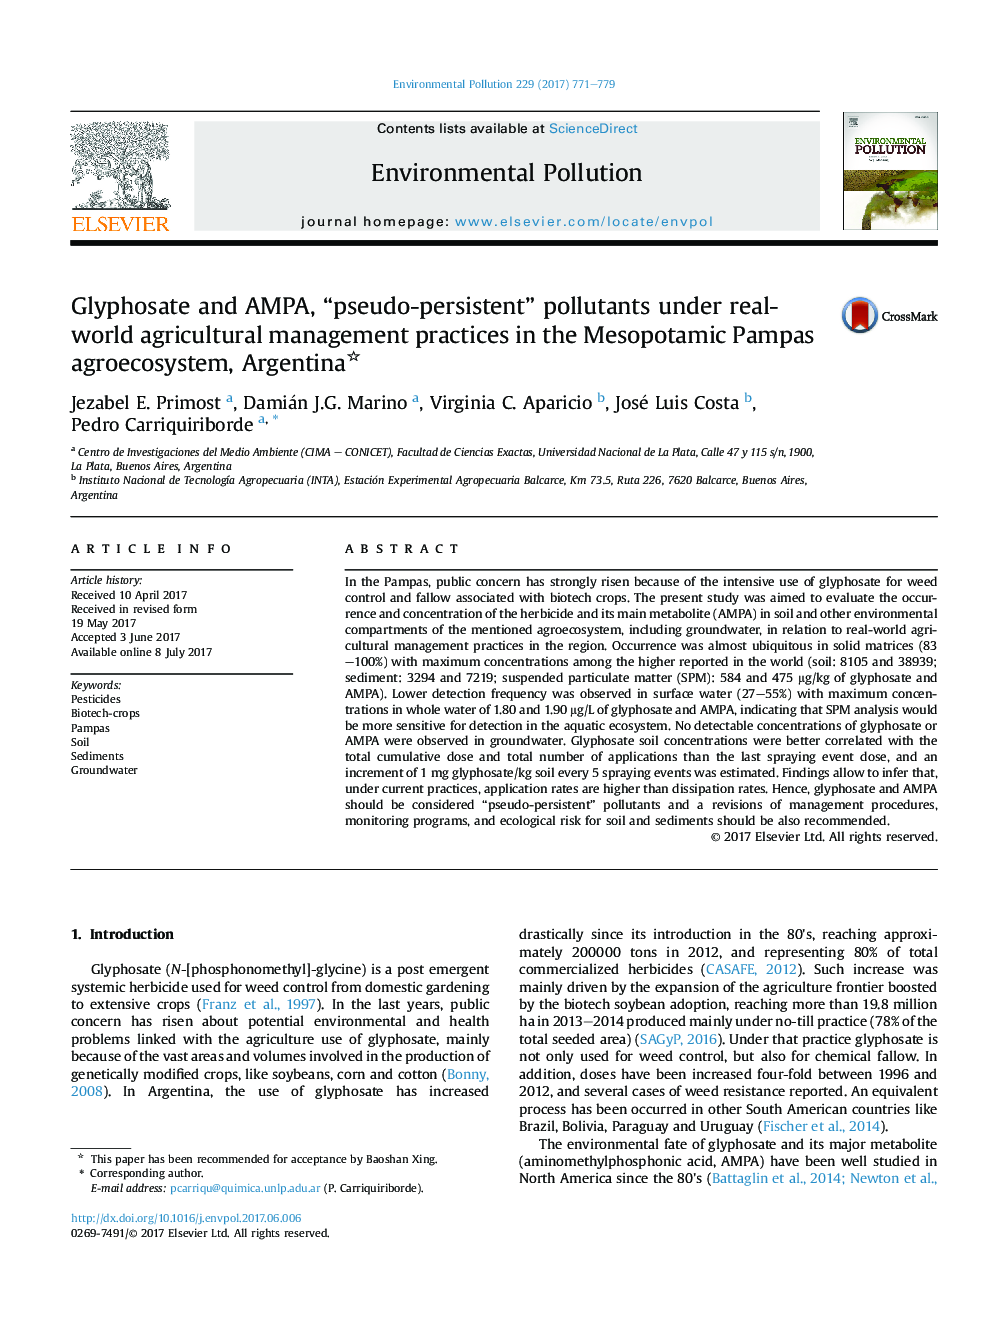 Glyphosate and AMPA, “pseudo-persistent” pollutants under real-world agricultural management practices in the Mesopotamic Pampas agroecosystem, Argentina